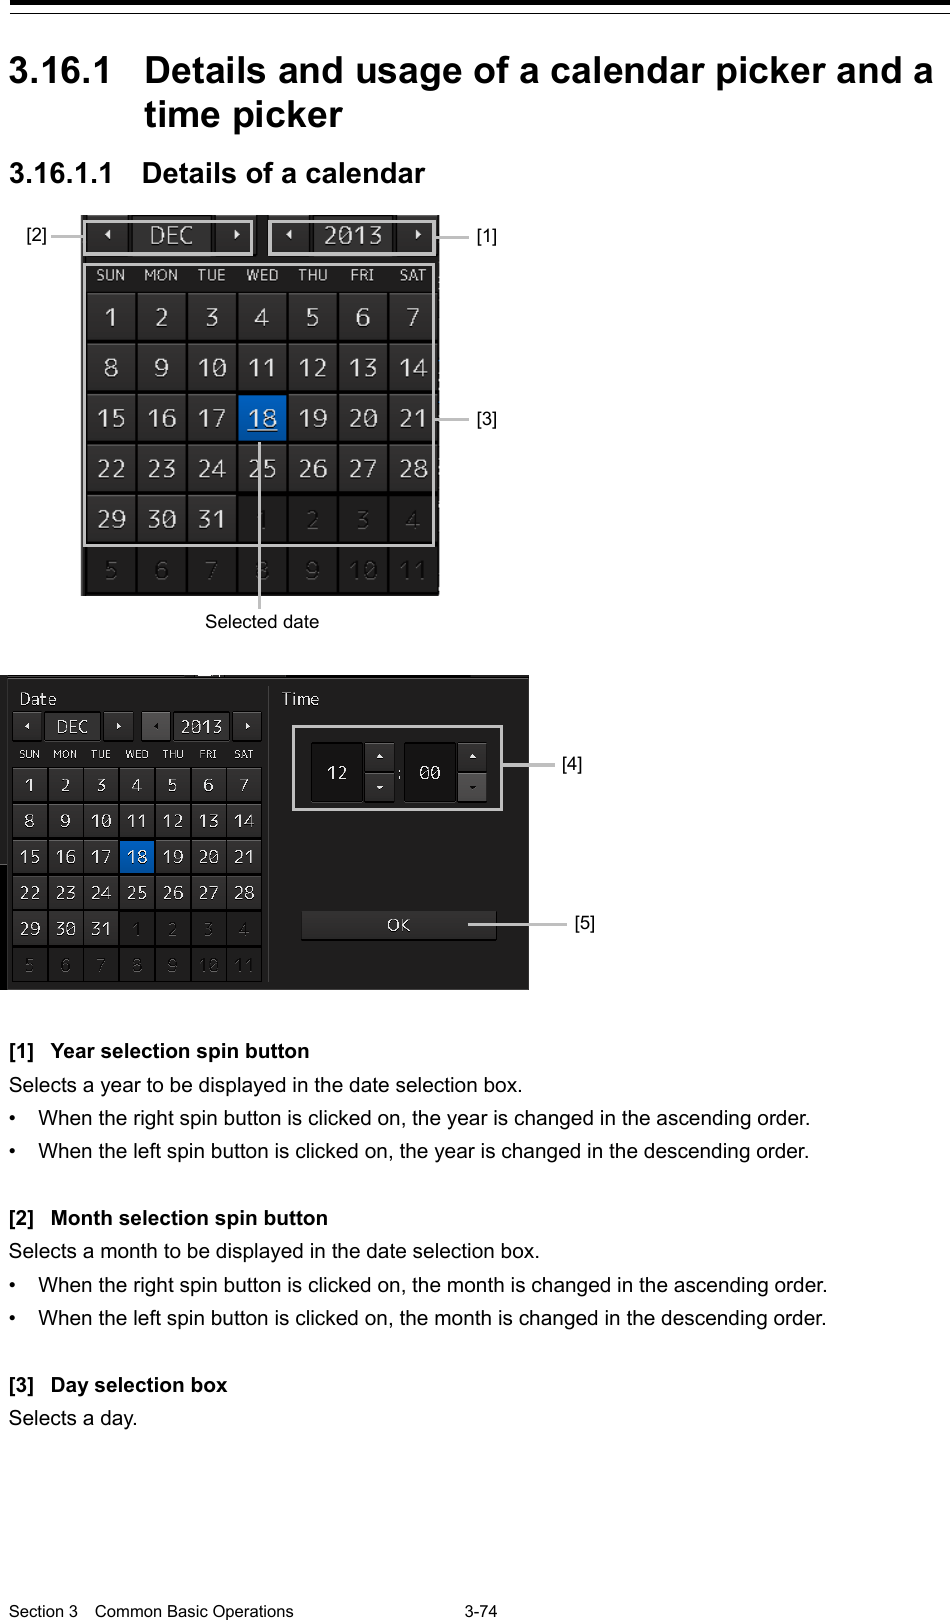  Section 3  Common Basic Operations  3-74  3.16.1 Details and usage of a calendar picker and a time picker 3.16.1.1 Details of a calendar   [1] Year selection spin button Selects a year to be displayed in the date selection box. • When the right spin button is clicked on, the year is changed in the ascending order. • When the left spin button is clicked on, the year is changed in the descending order.  [2] Month selection spin button Selects a month to be displayed in the date selection box. • When the right spin button is clicked on, the month is changed in the ascending order. • When the left spin button is clicked on, the month is changed in the descending order.  [3] Day selection box Selects a day.      [1] [3] Selected date  [5] [4] [2] 